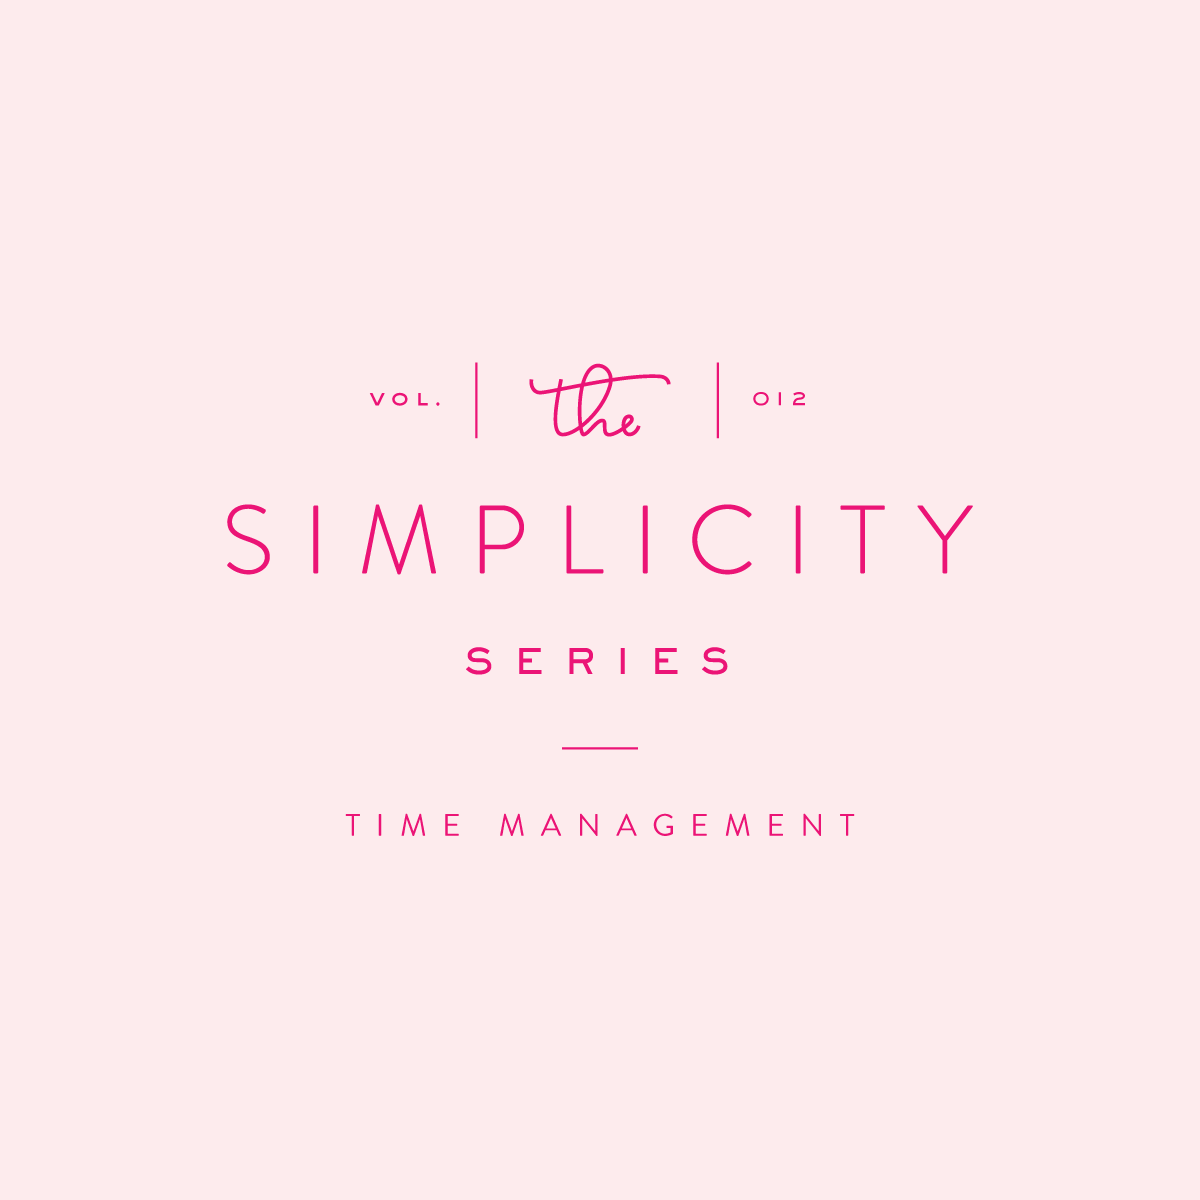 Simplified Schedule: Time Management